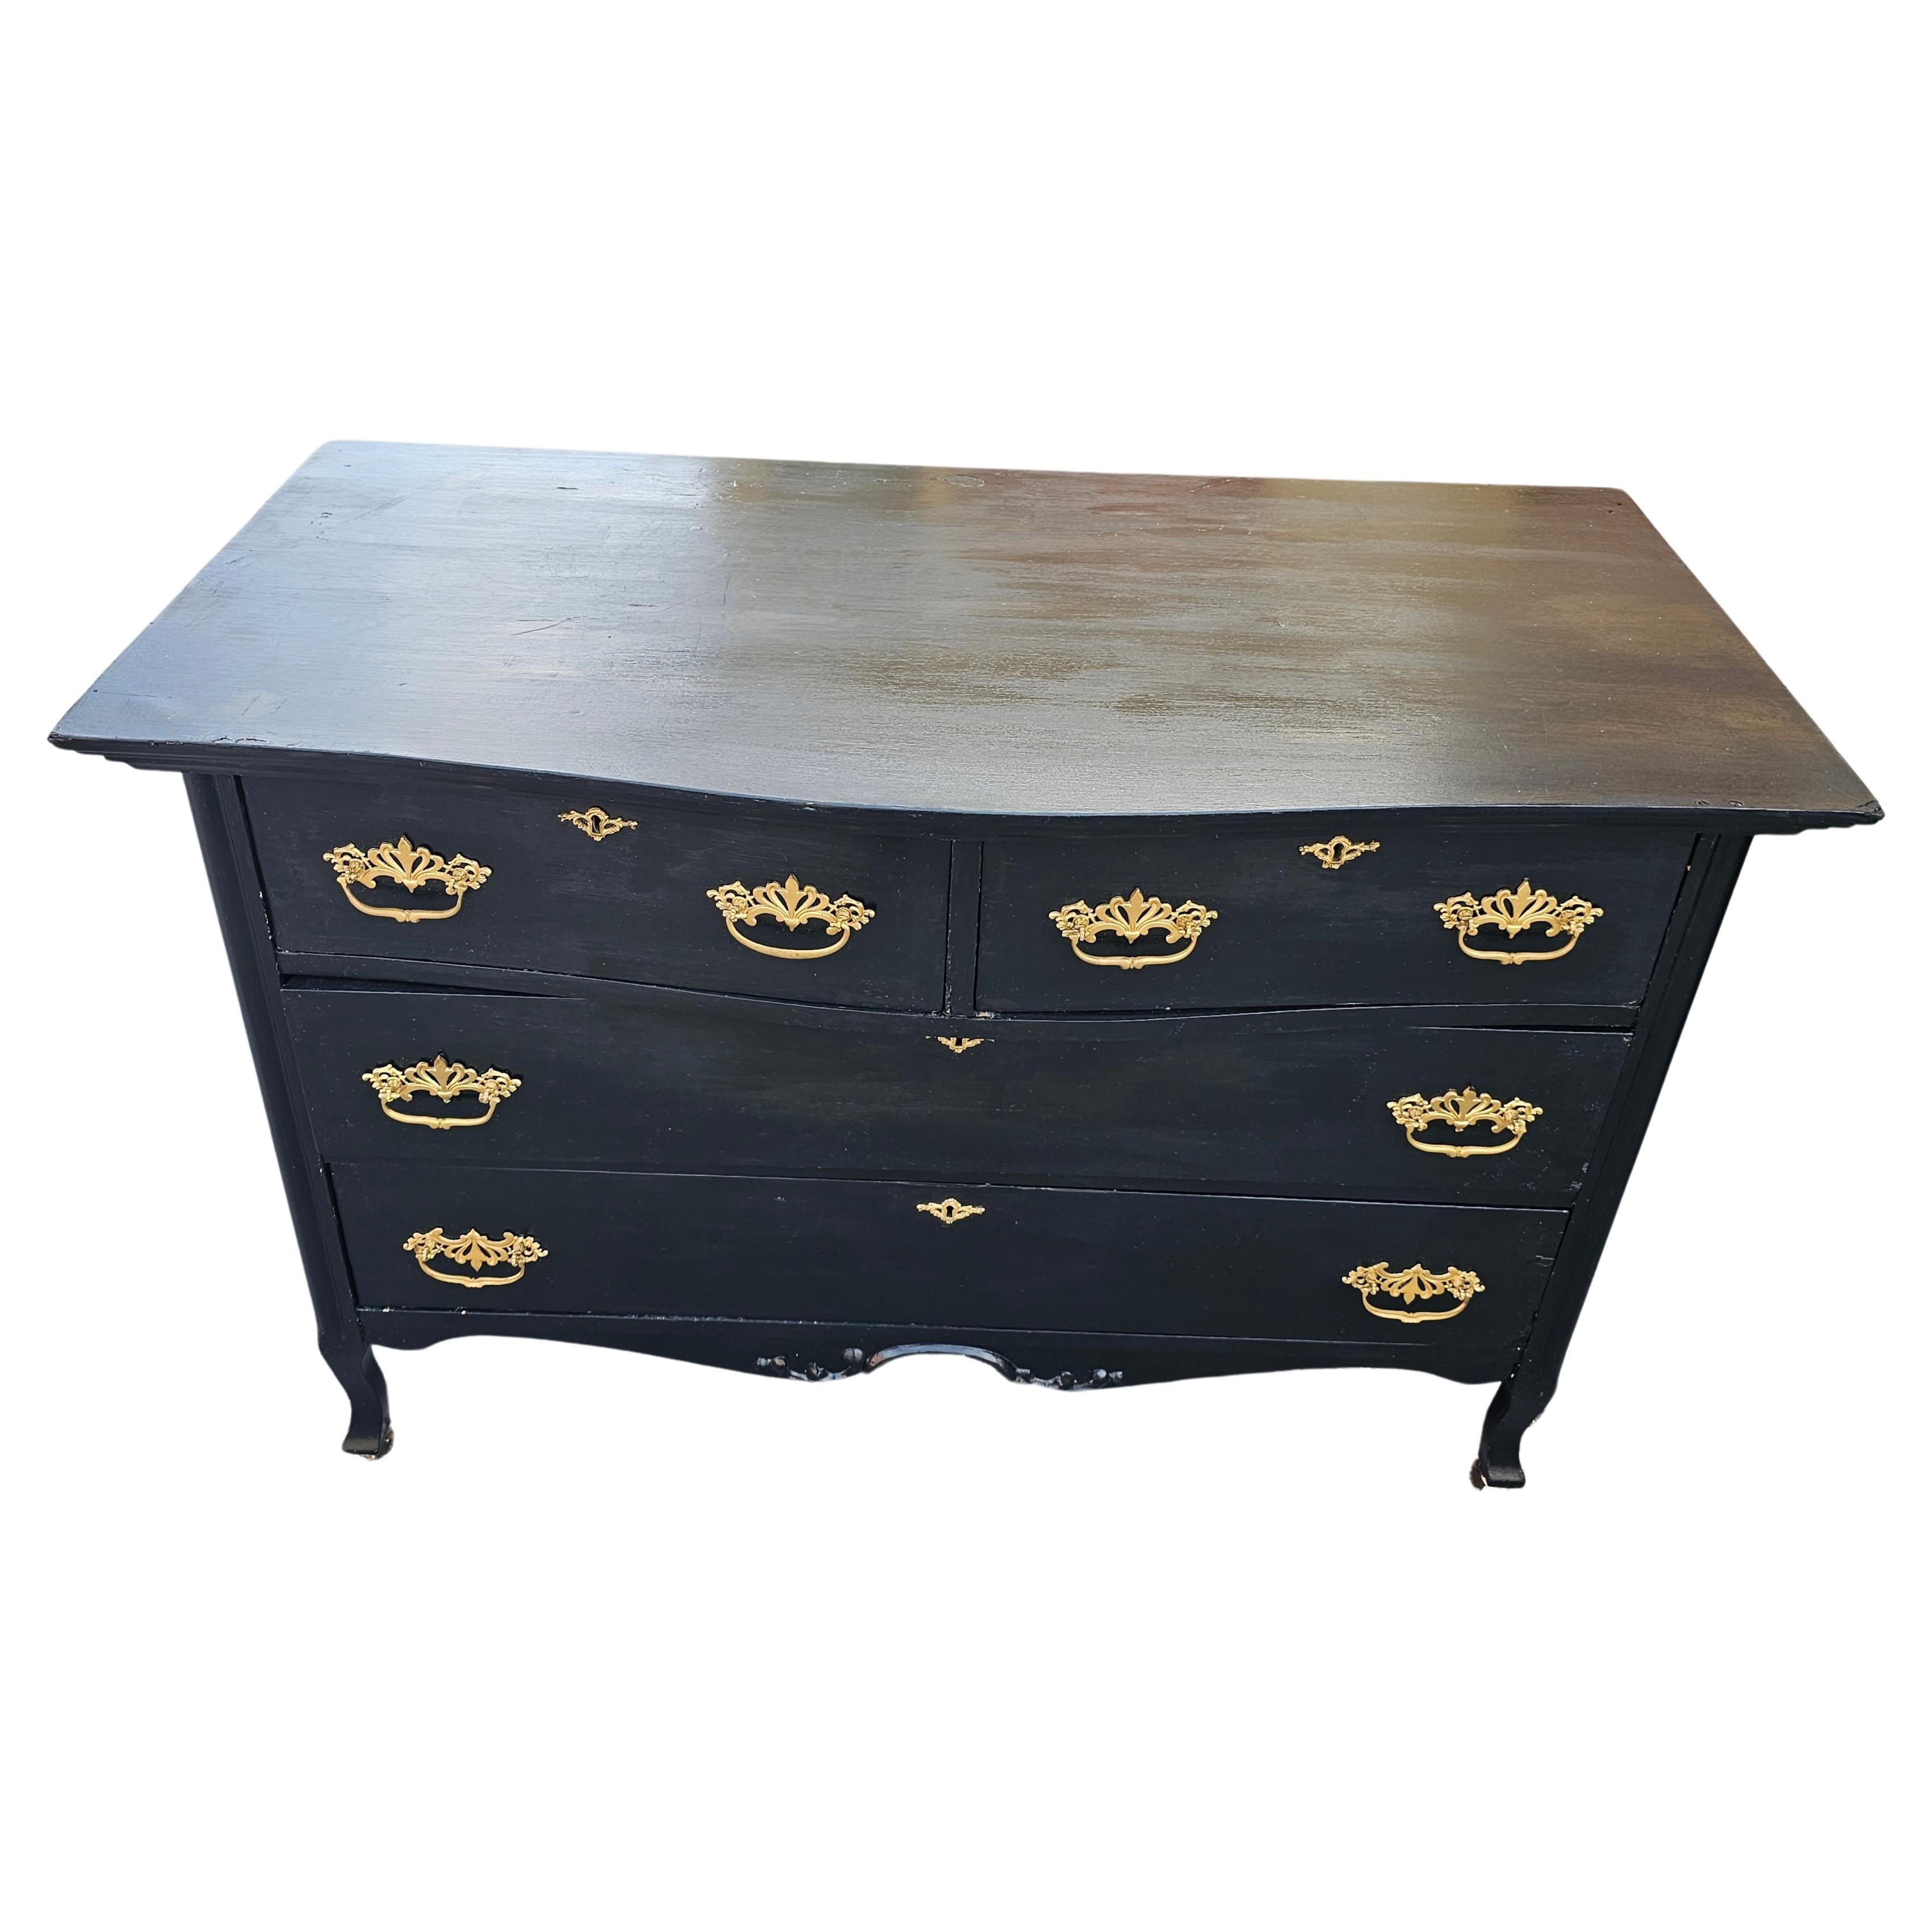 19th Century Painted Solid Pine 4-Drawer Dresser on Wheels For Sale